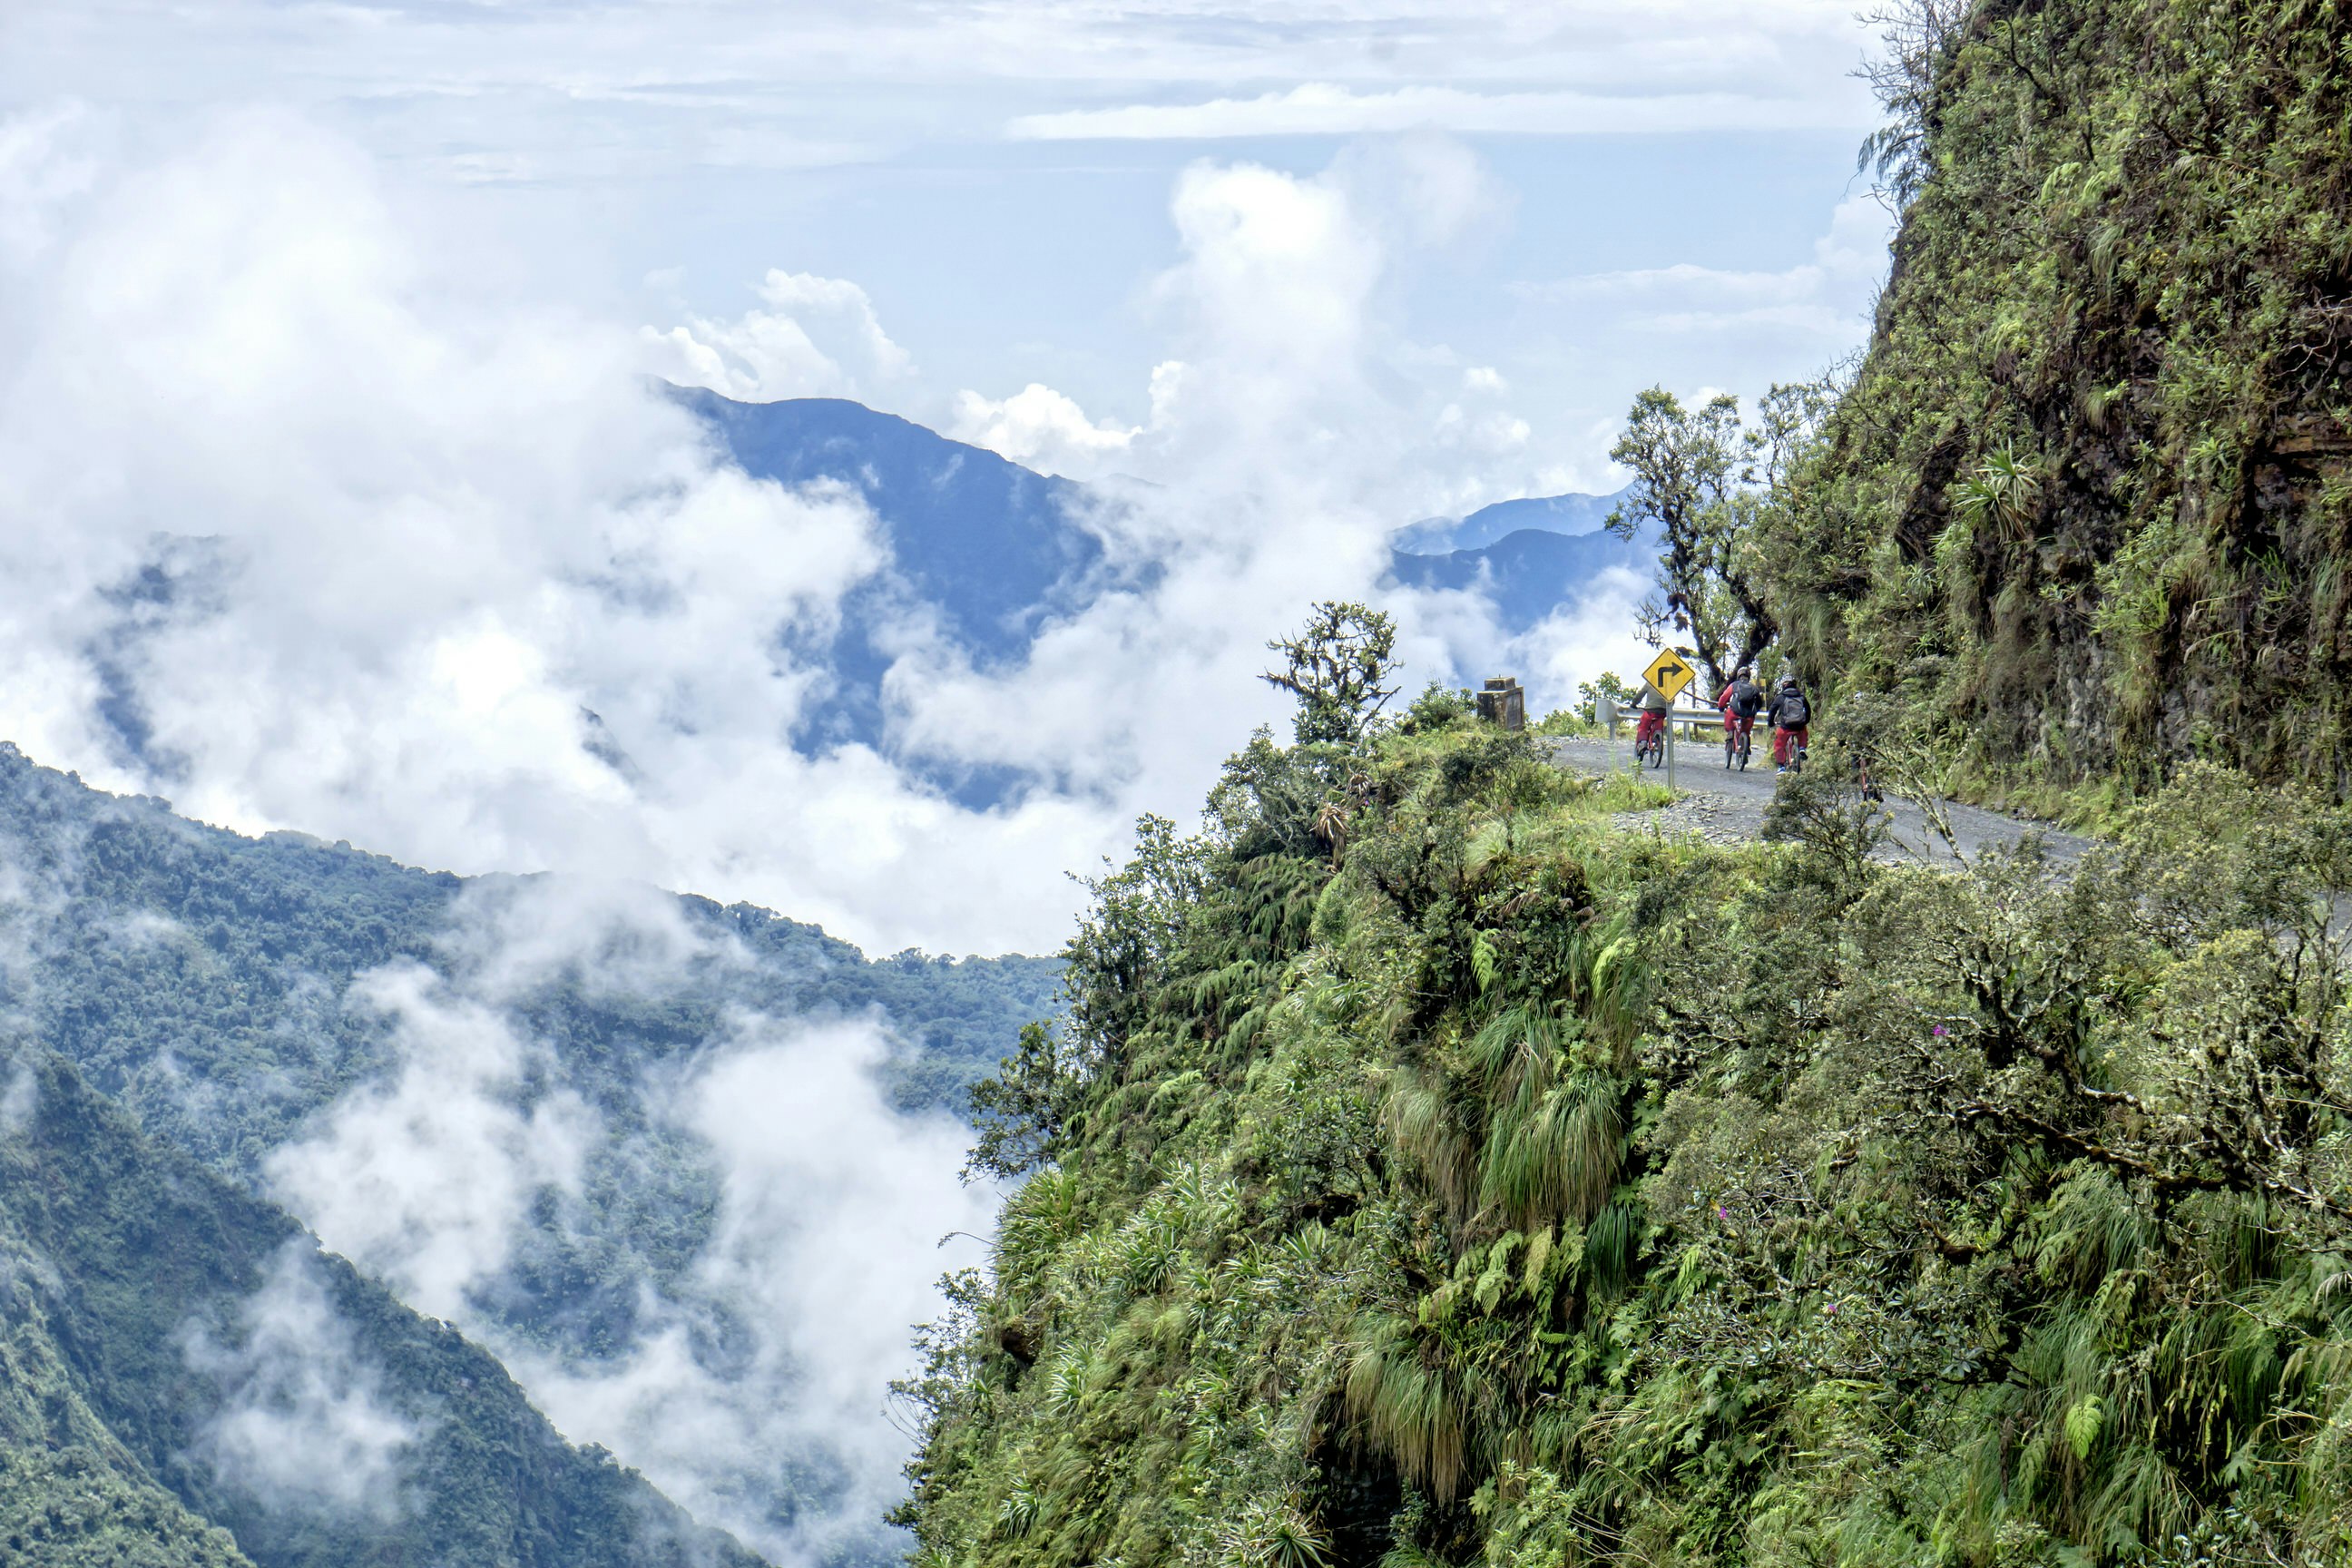 Three mountain bikers ride along a narrow section of road towards a corner; below the road is a 3600m vertical drop down a sheer vegetation-clad cliff. Clouds dot the valley below.